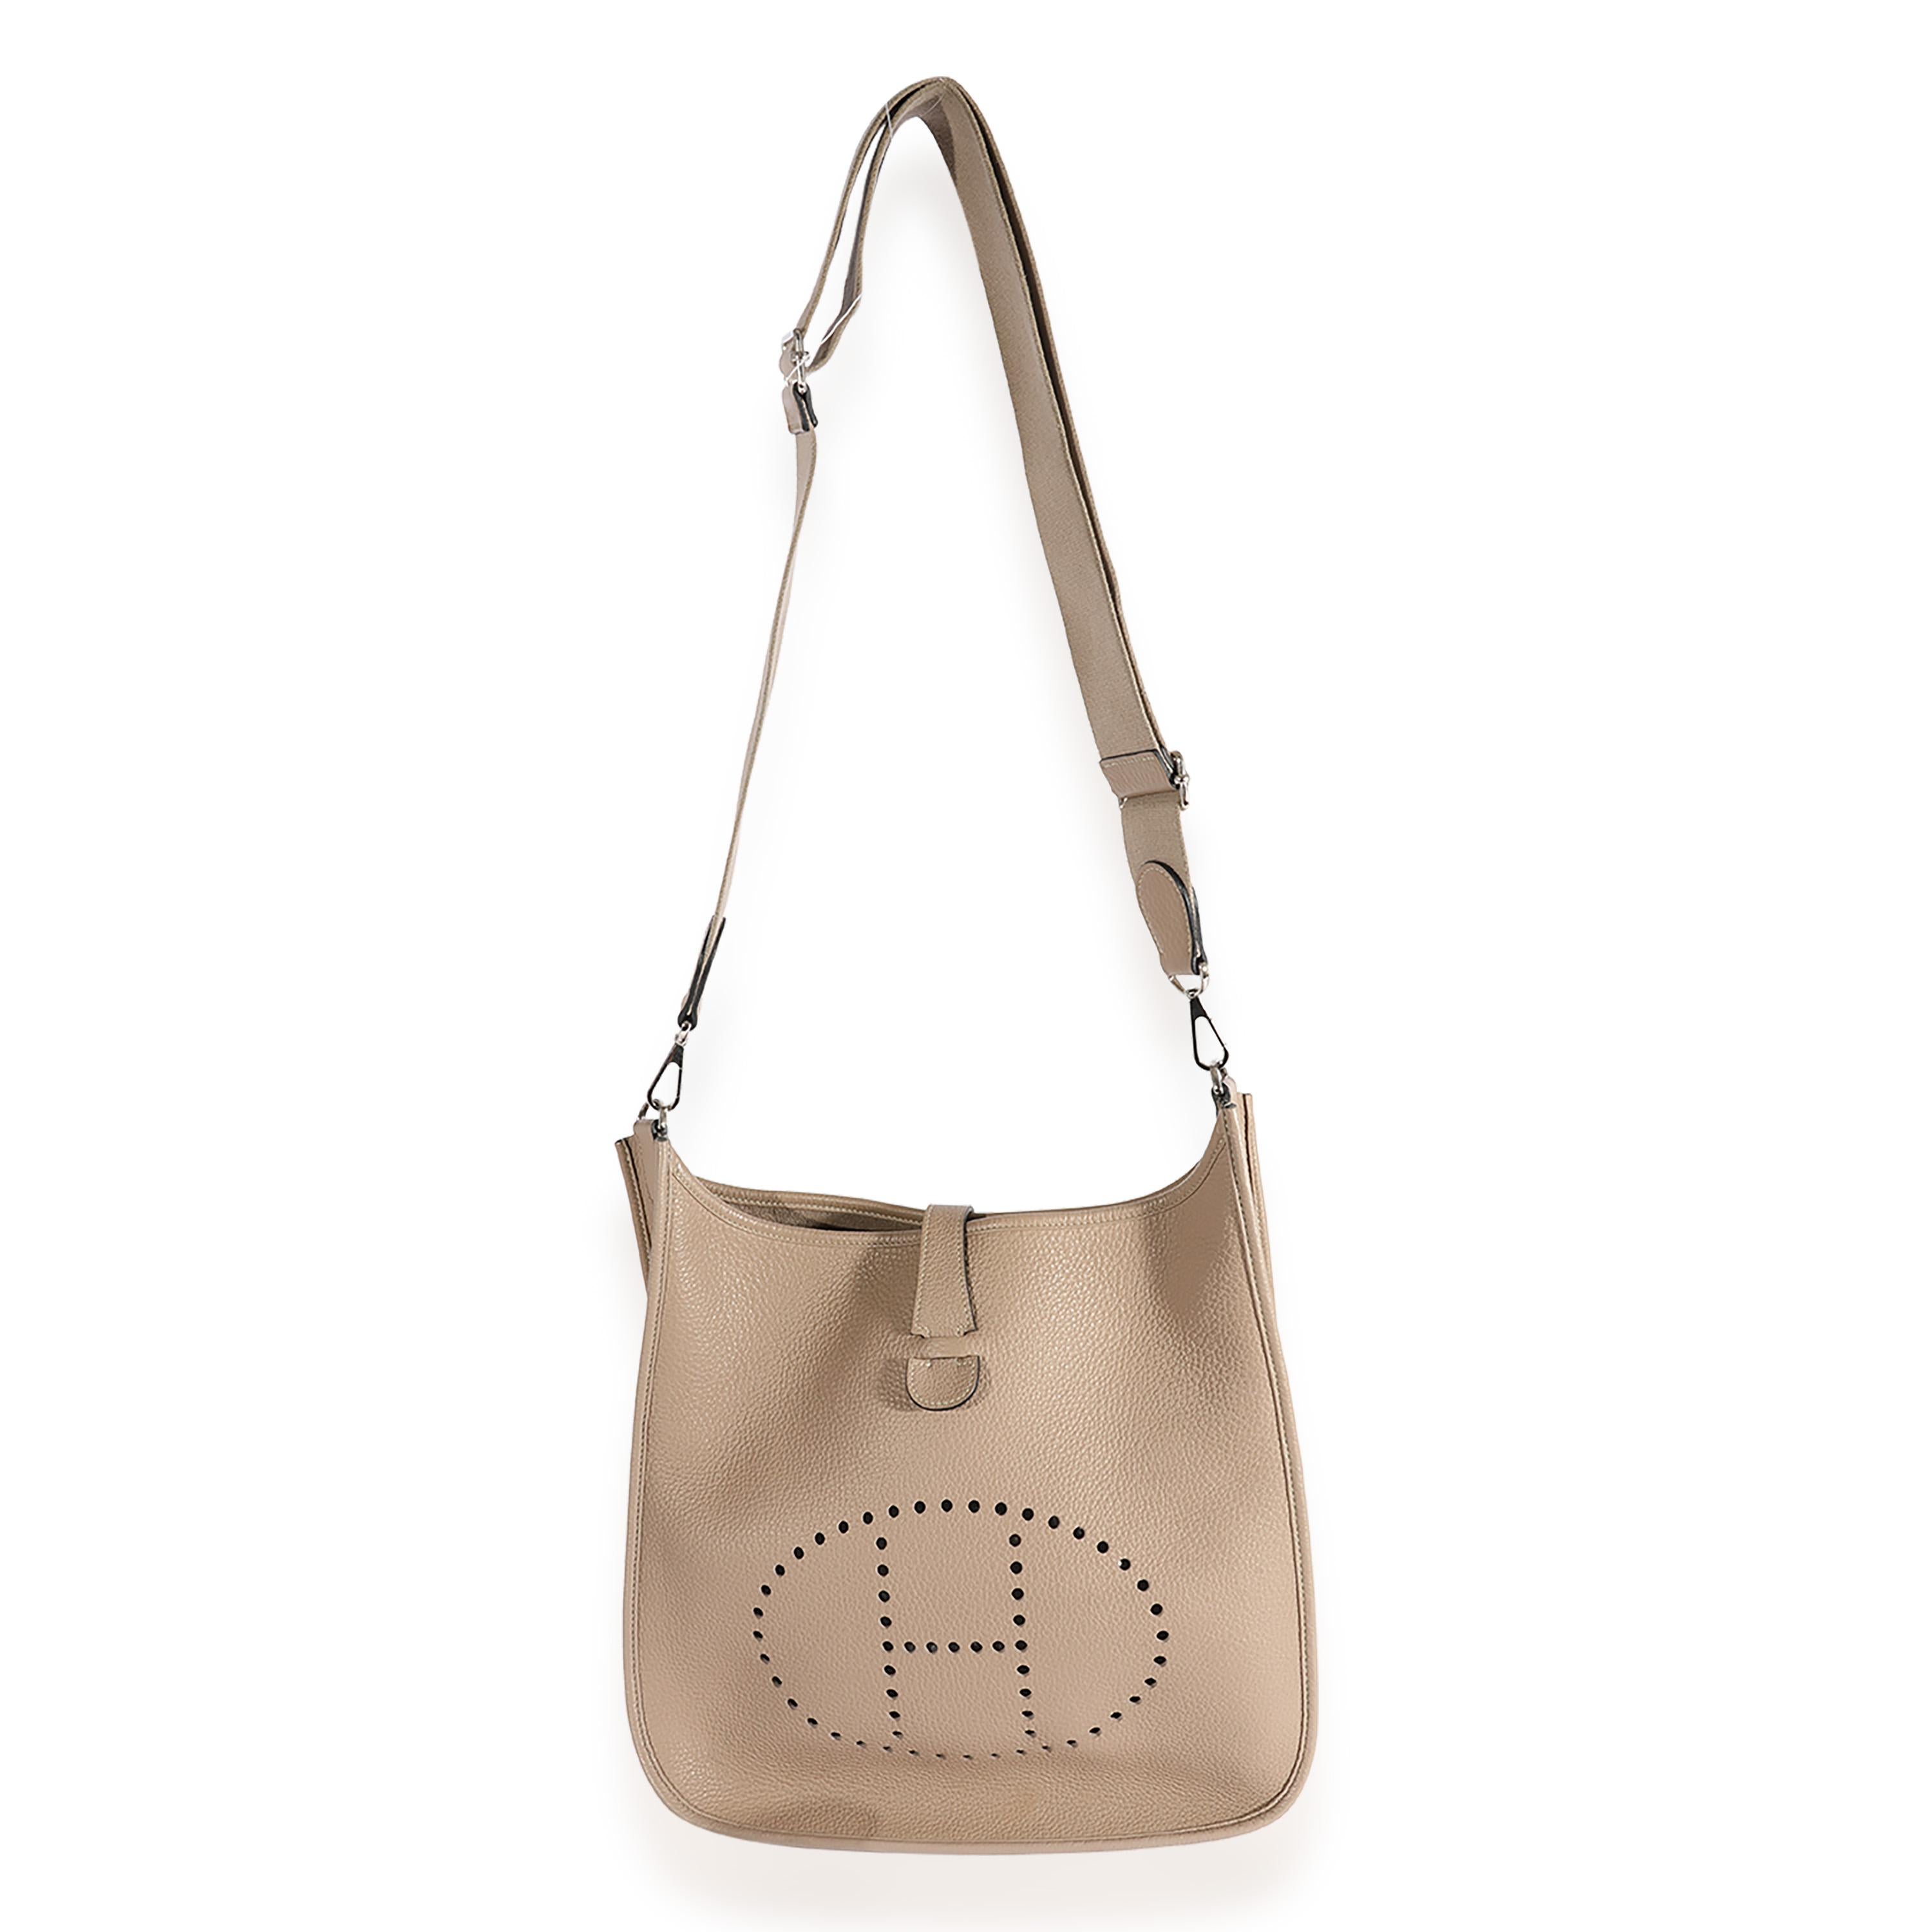 Listing Title: Hermès Gris Asphalte Clémence Evelyne III 33 PHW
SKU: 123521
Condition: Pre-owned 
Handbag Condition: Good
Condition Comments: Good Condition. Light scuffing to corners and exterior. Discoloration throughout leather. Scuffing to